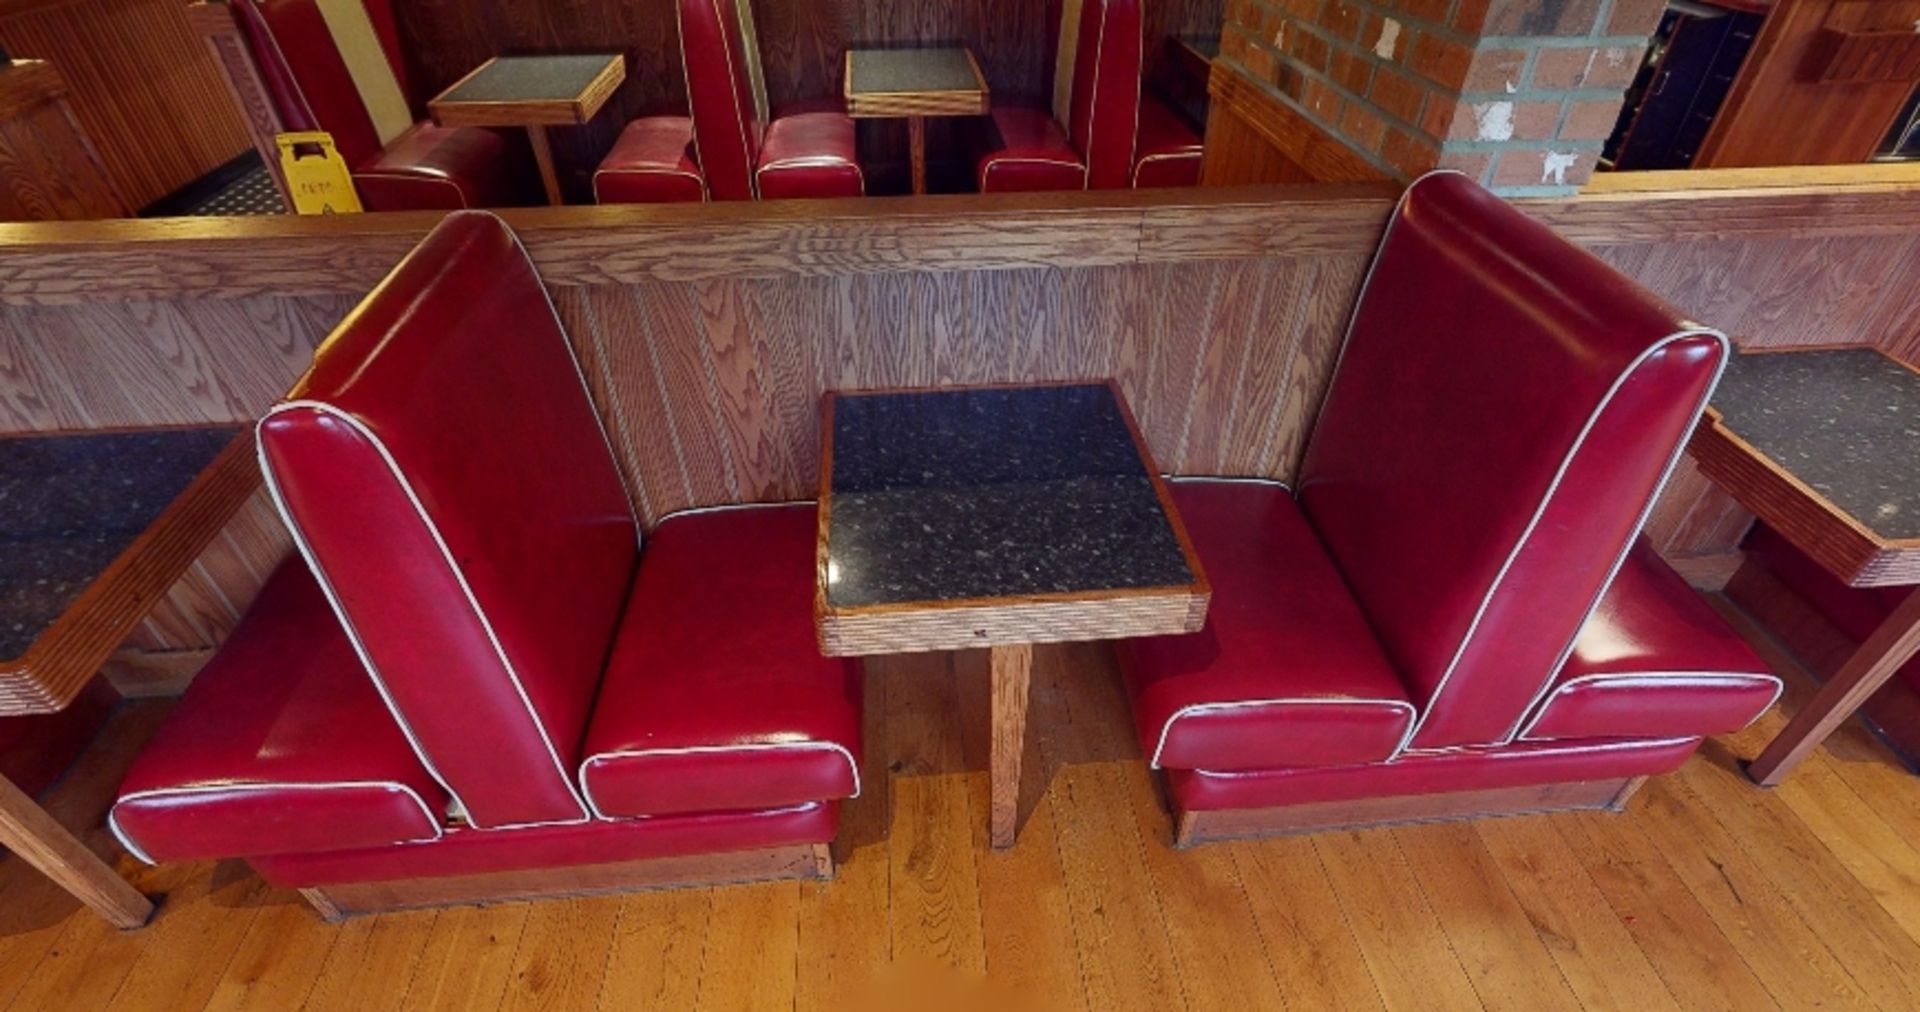 Selection of Single Seating Benches and Dining Tables to Seat Upto 10 Persons - Retro - 1950's - Image 6 of 6